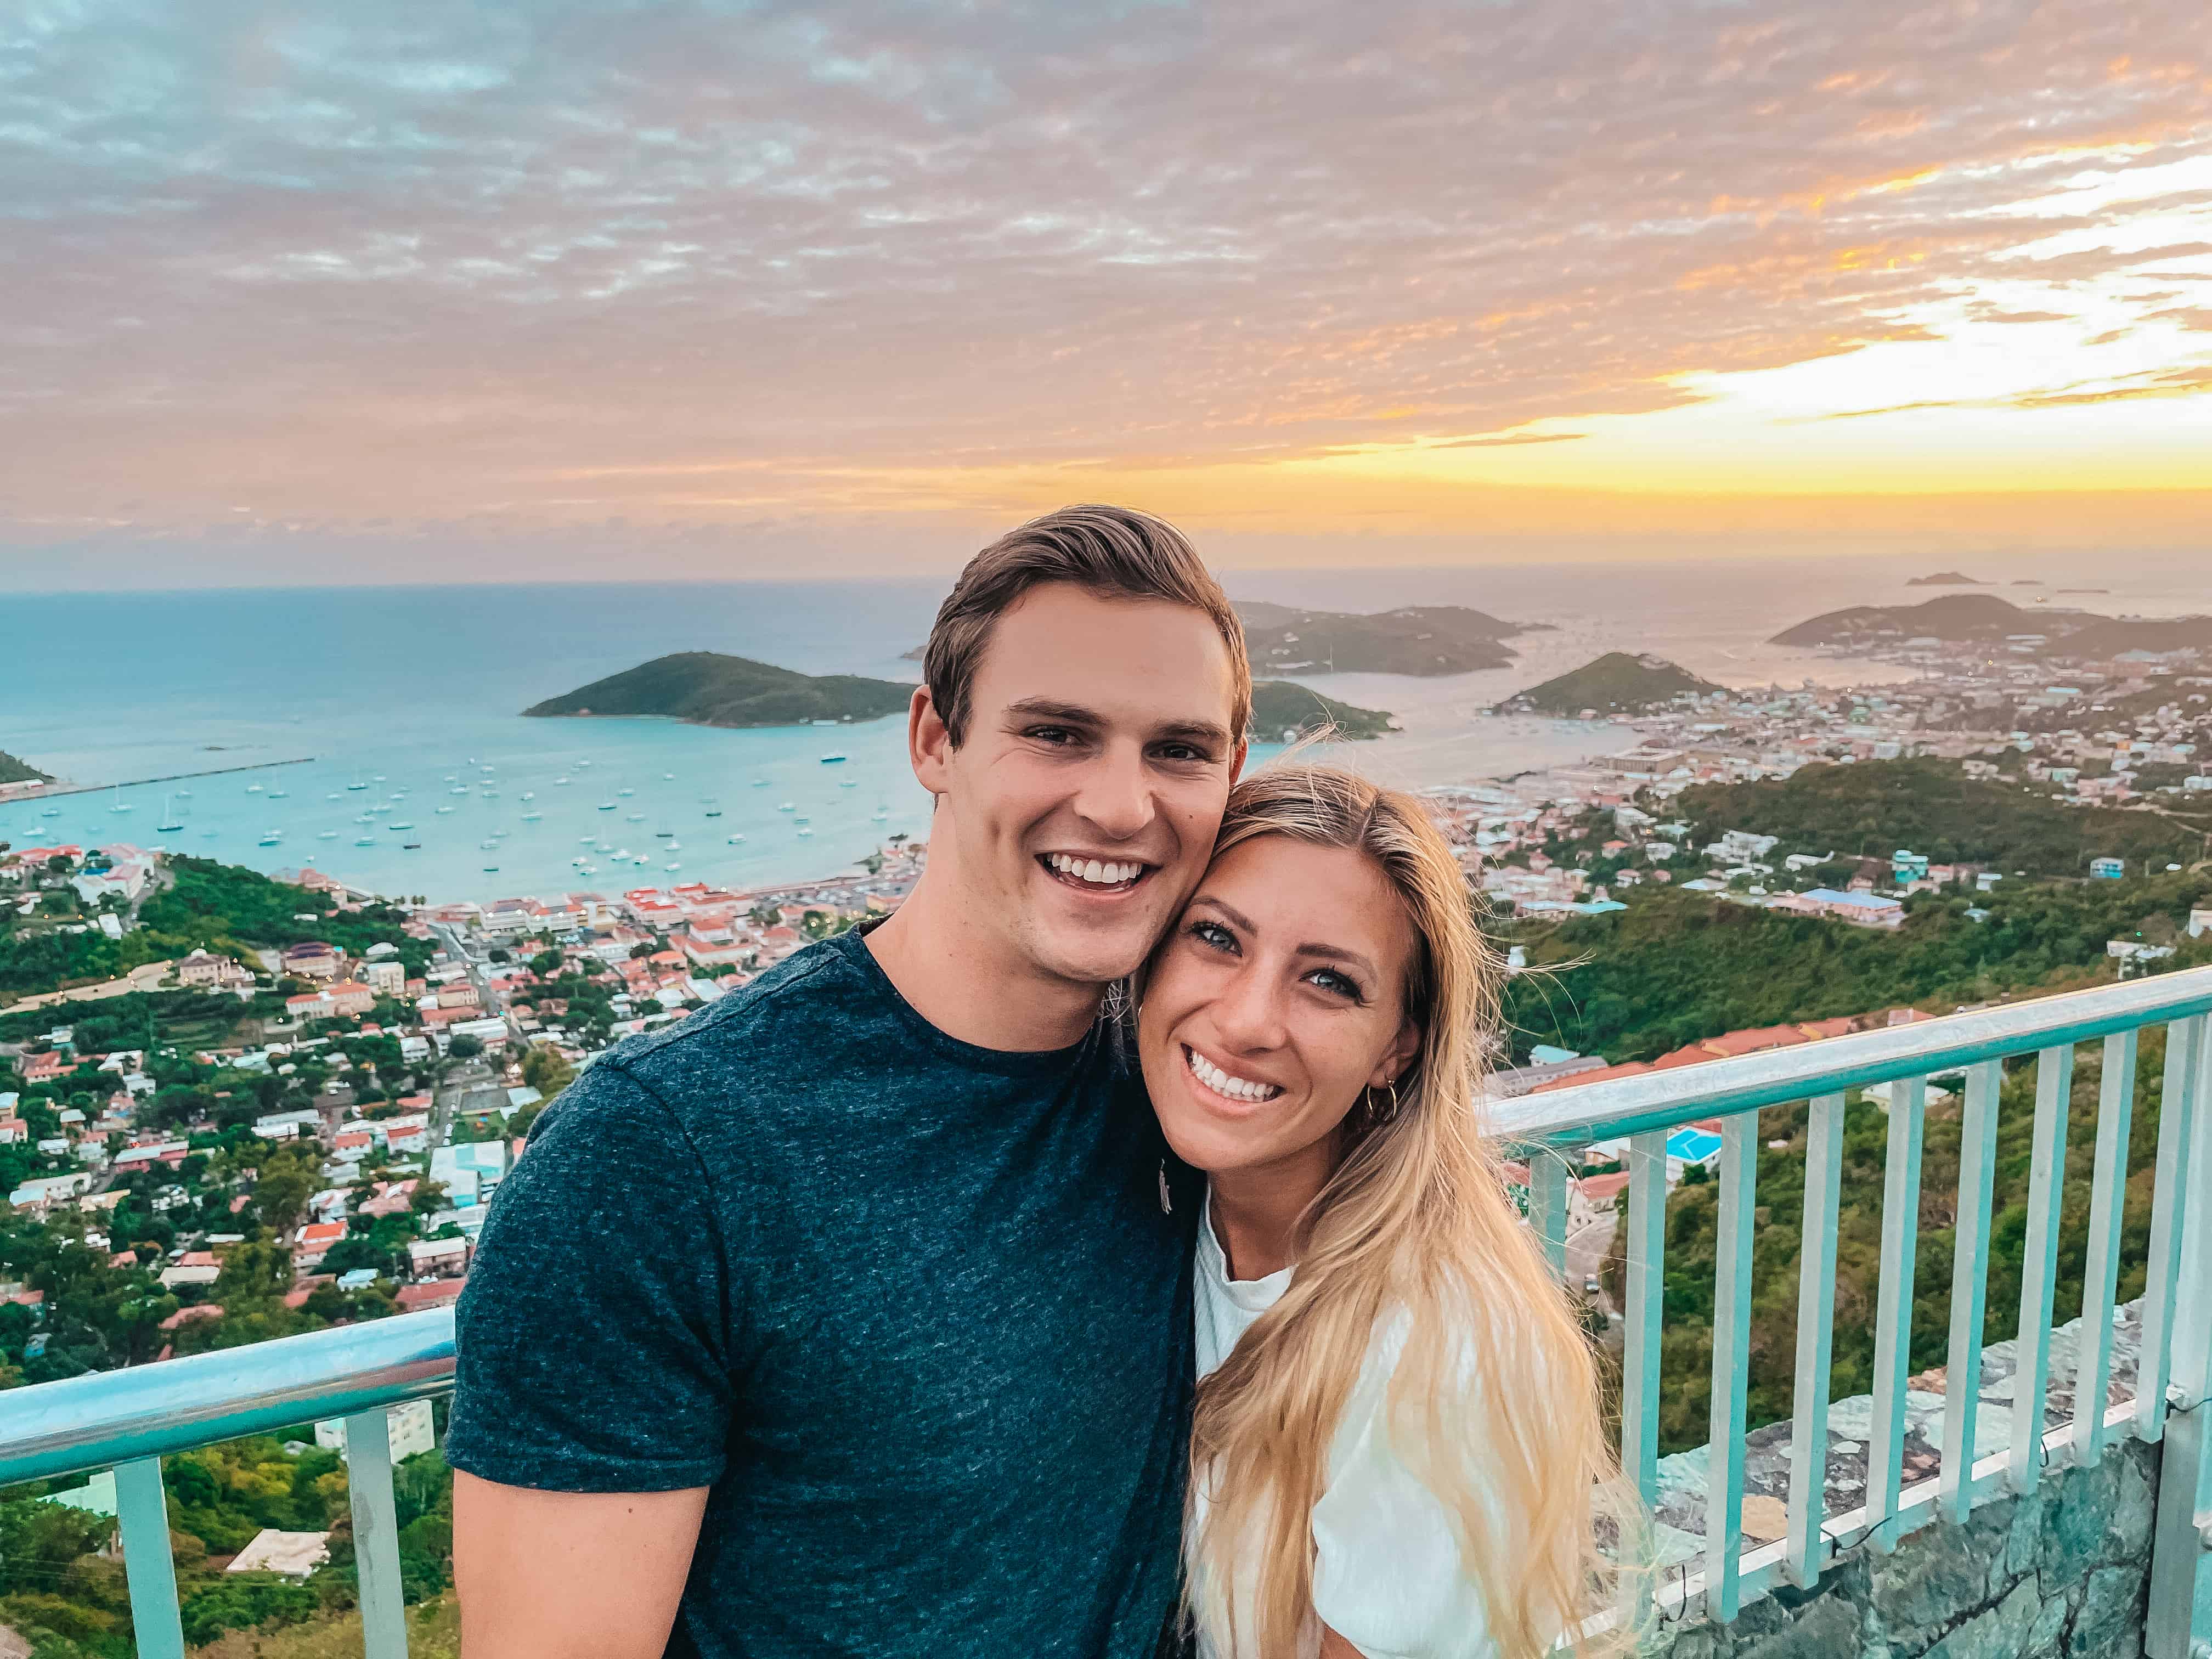 rachel and jason traveling, smiling at the camera at on overlook at sunset over St Thomas with the ocean and green hills